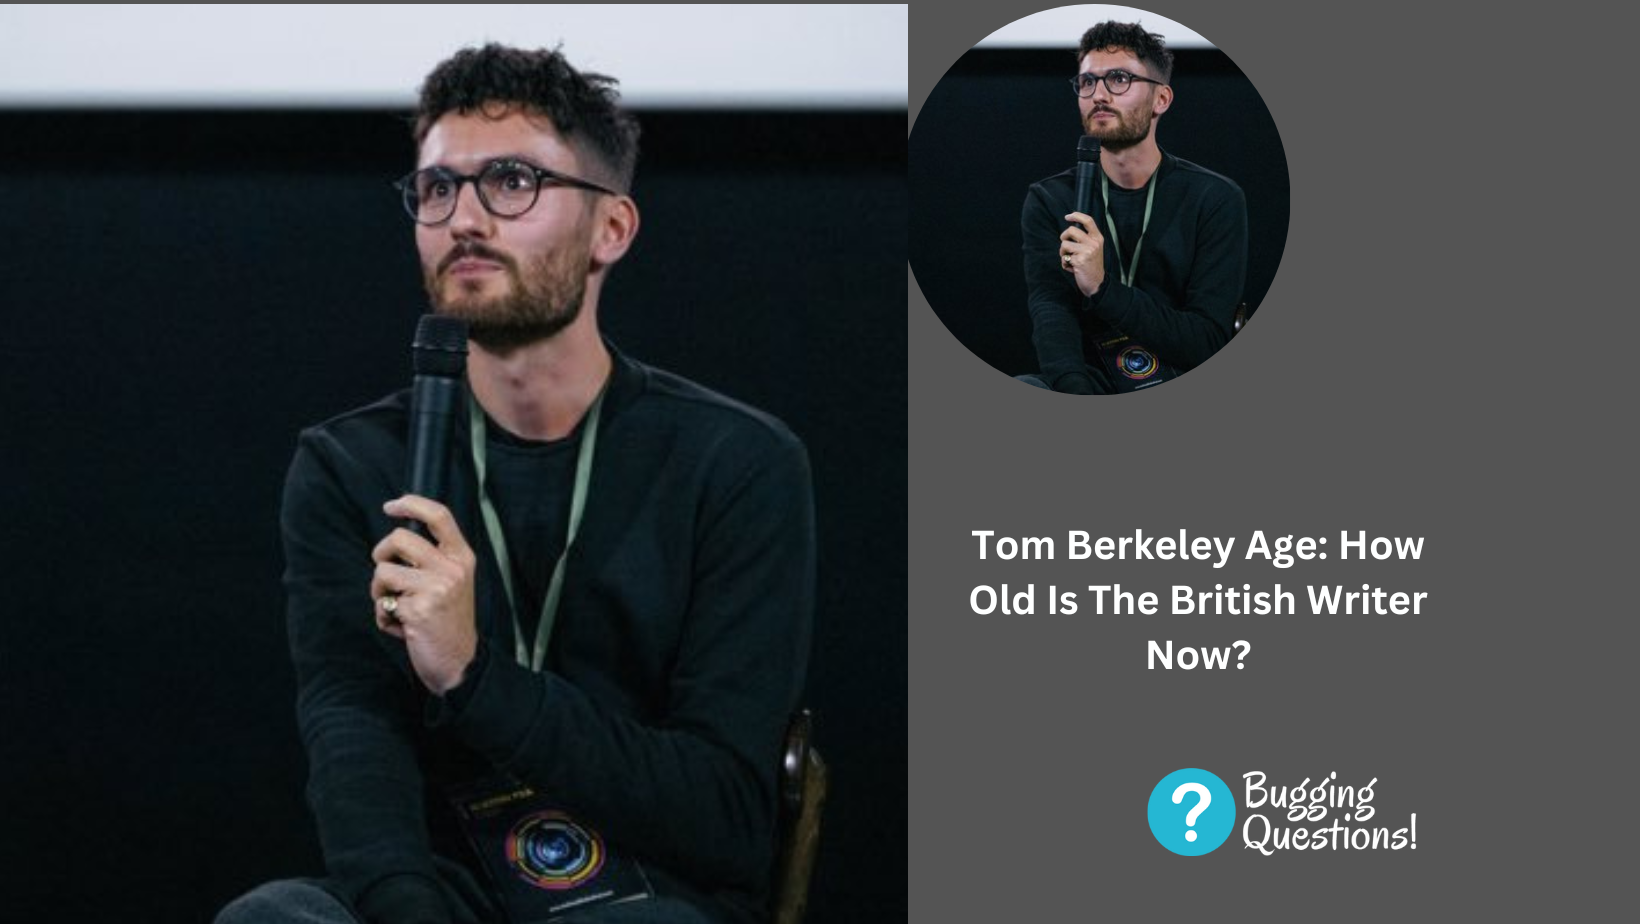 Tom Berkeley Age: How Old Is The British Writer Now?